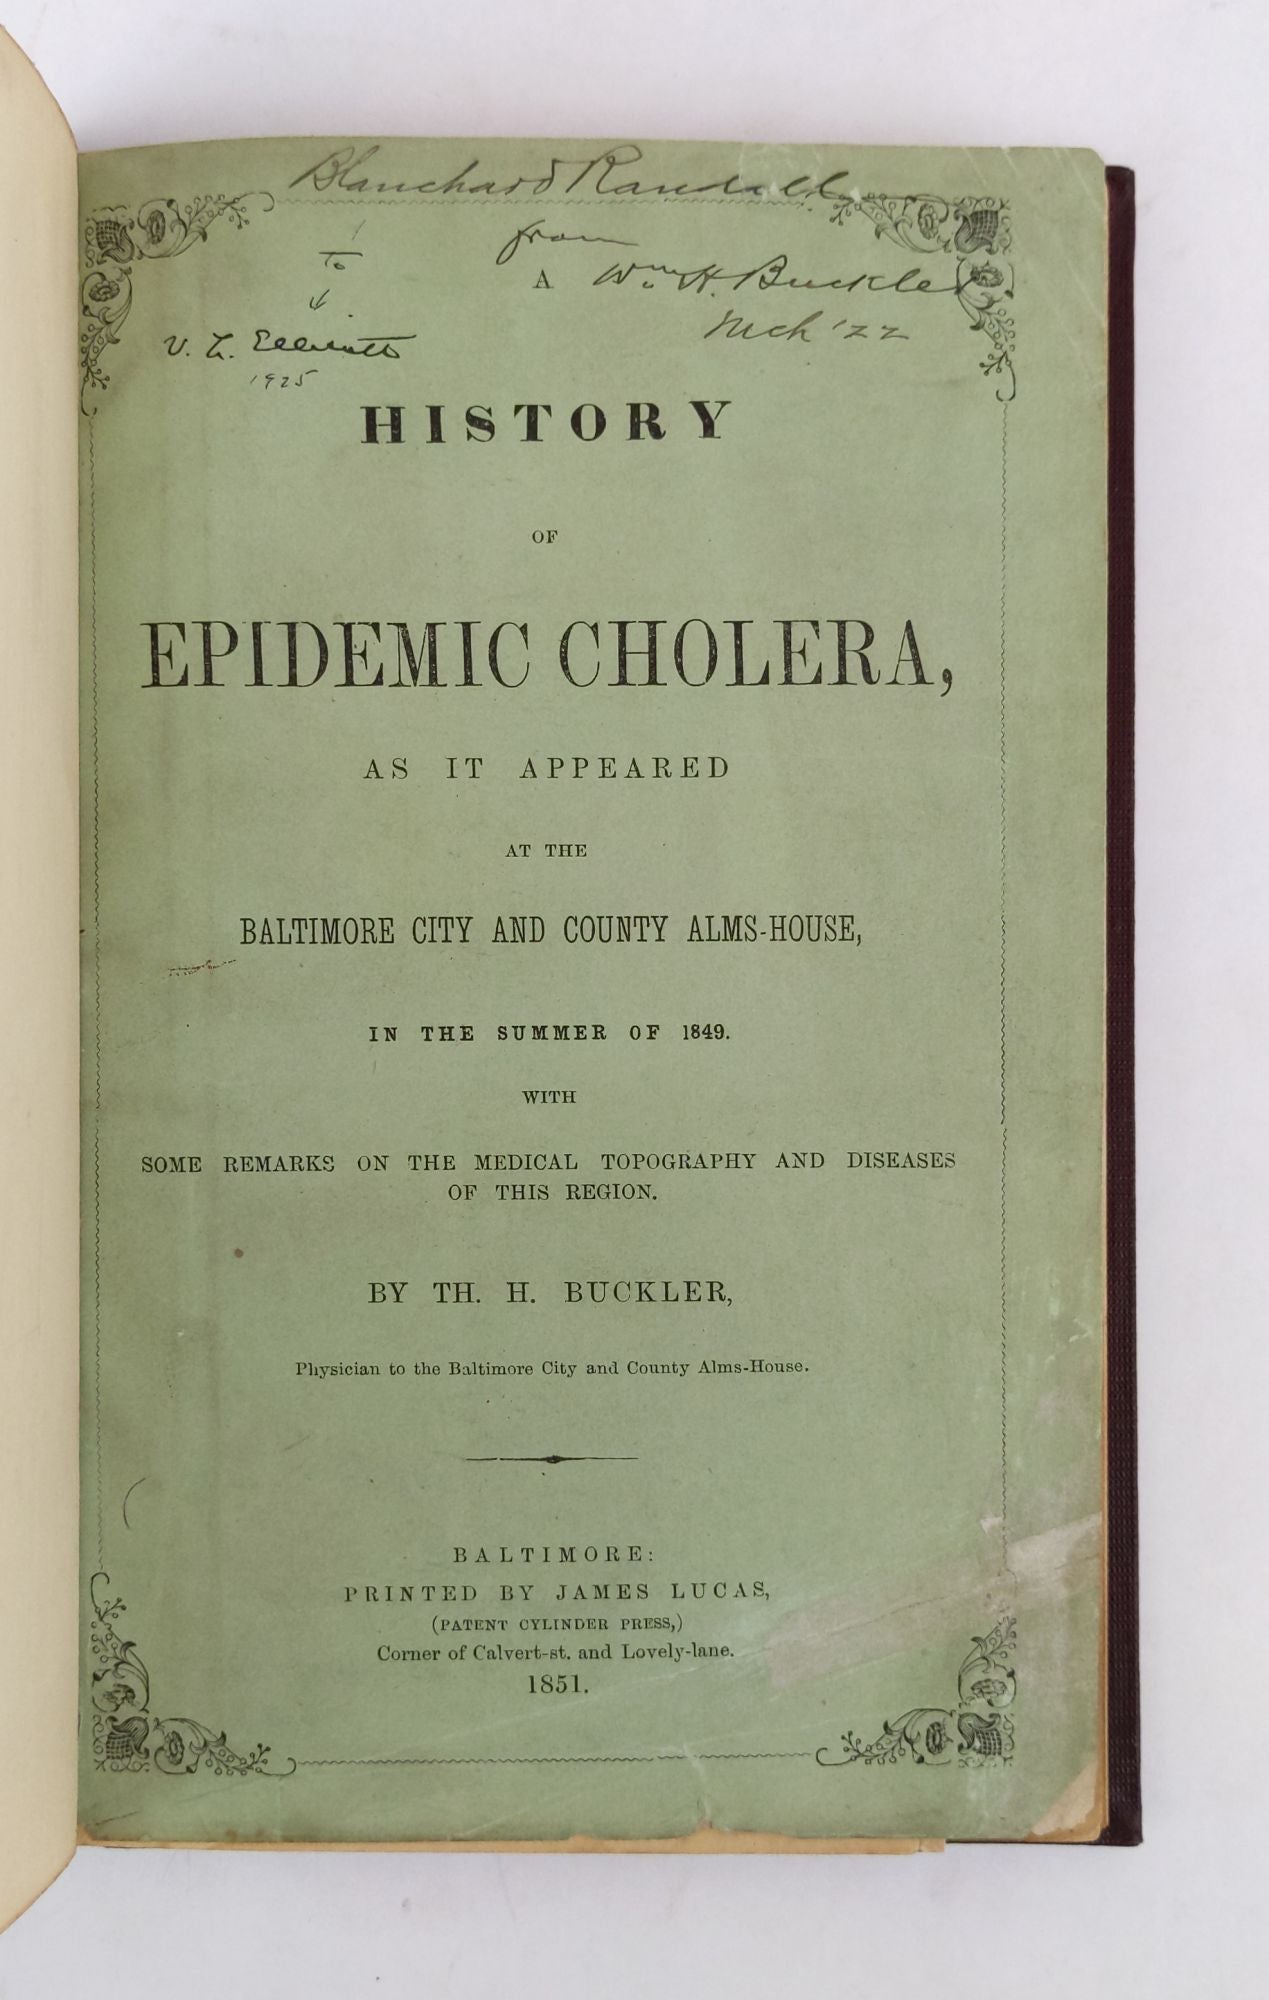 Product Image for A HISTORY OF EPIDEMIC CHOLERA, AS IT APPEARED AT THE BALTIMORE CITY AND COUNTY ALMS-HOUSE, IN THE SUMMER OF 1849. WITH SOME REMARKS ON THE MEDICAL TOPOGRAPHY AND DISEASES OF THIS REGION